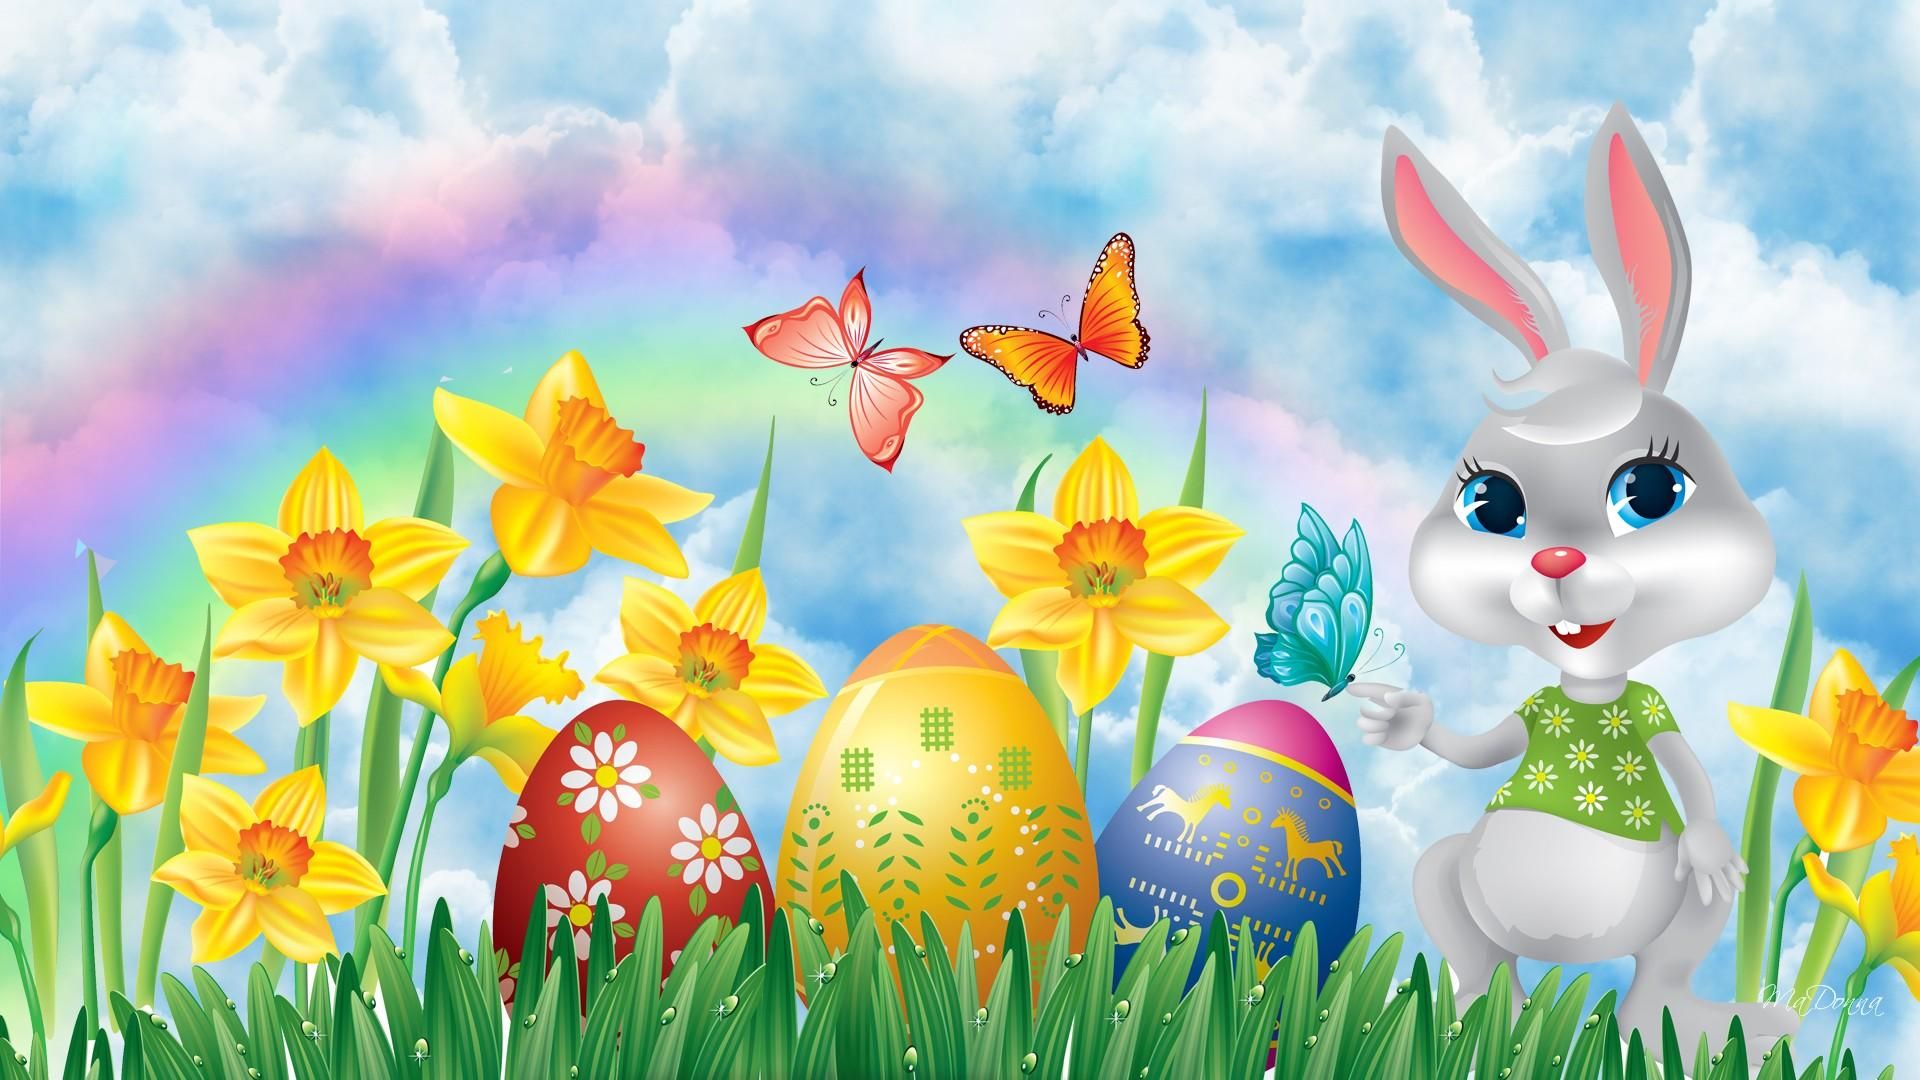 Free download Happy Easter 2020 Images Quotes Wishes Messages SMS and